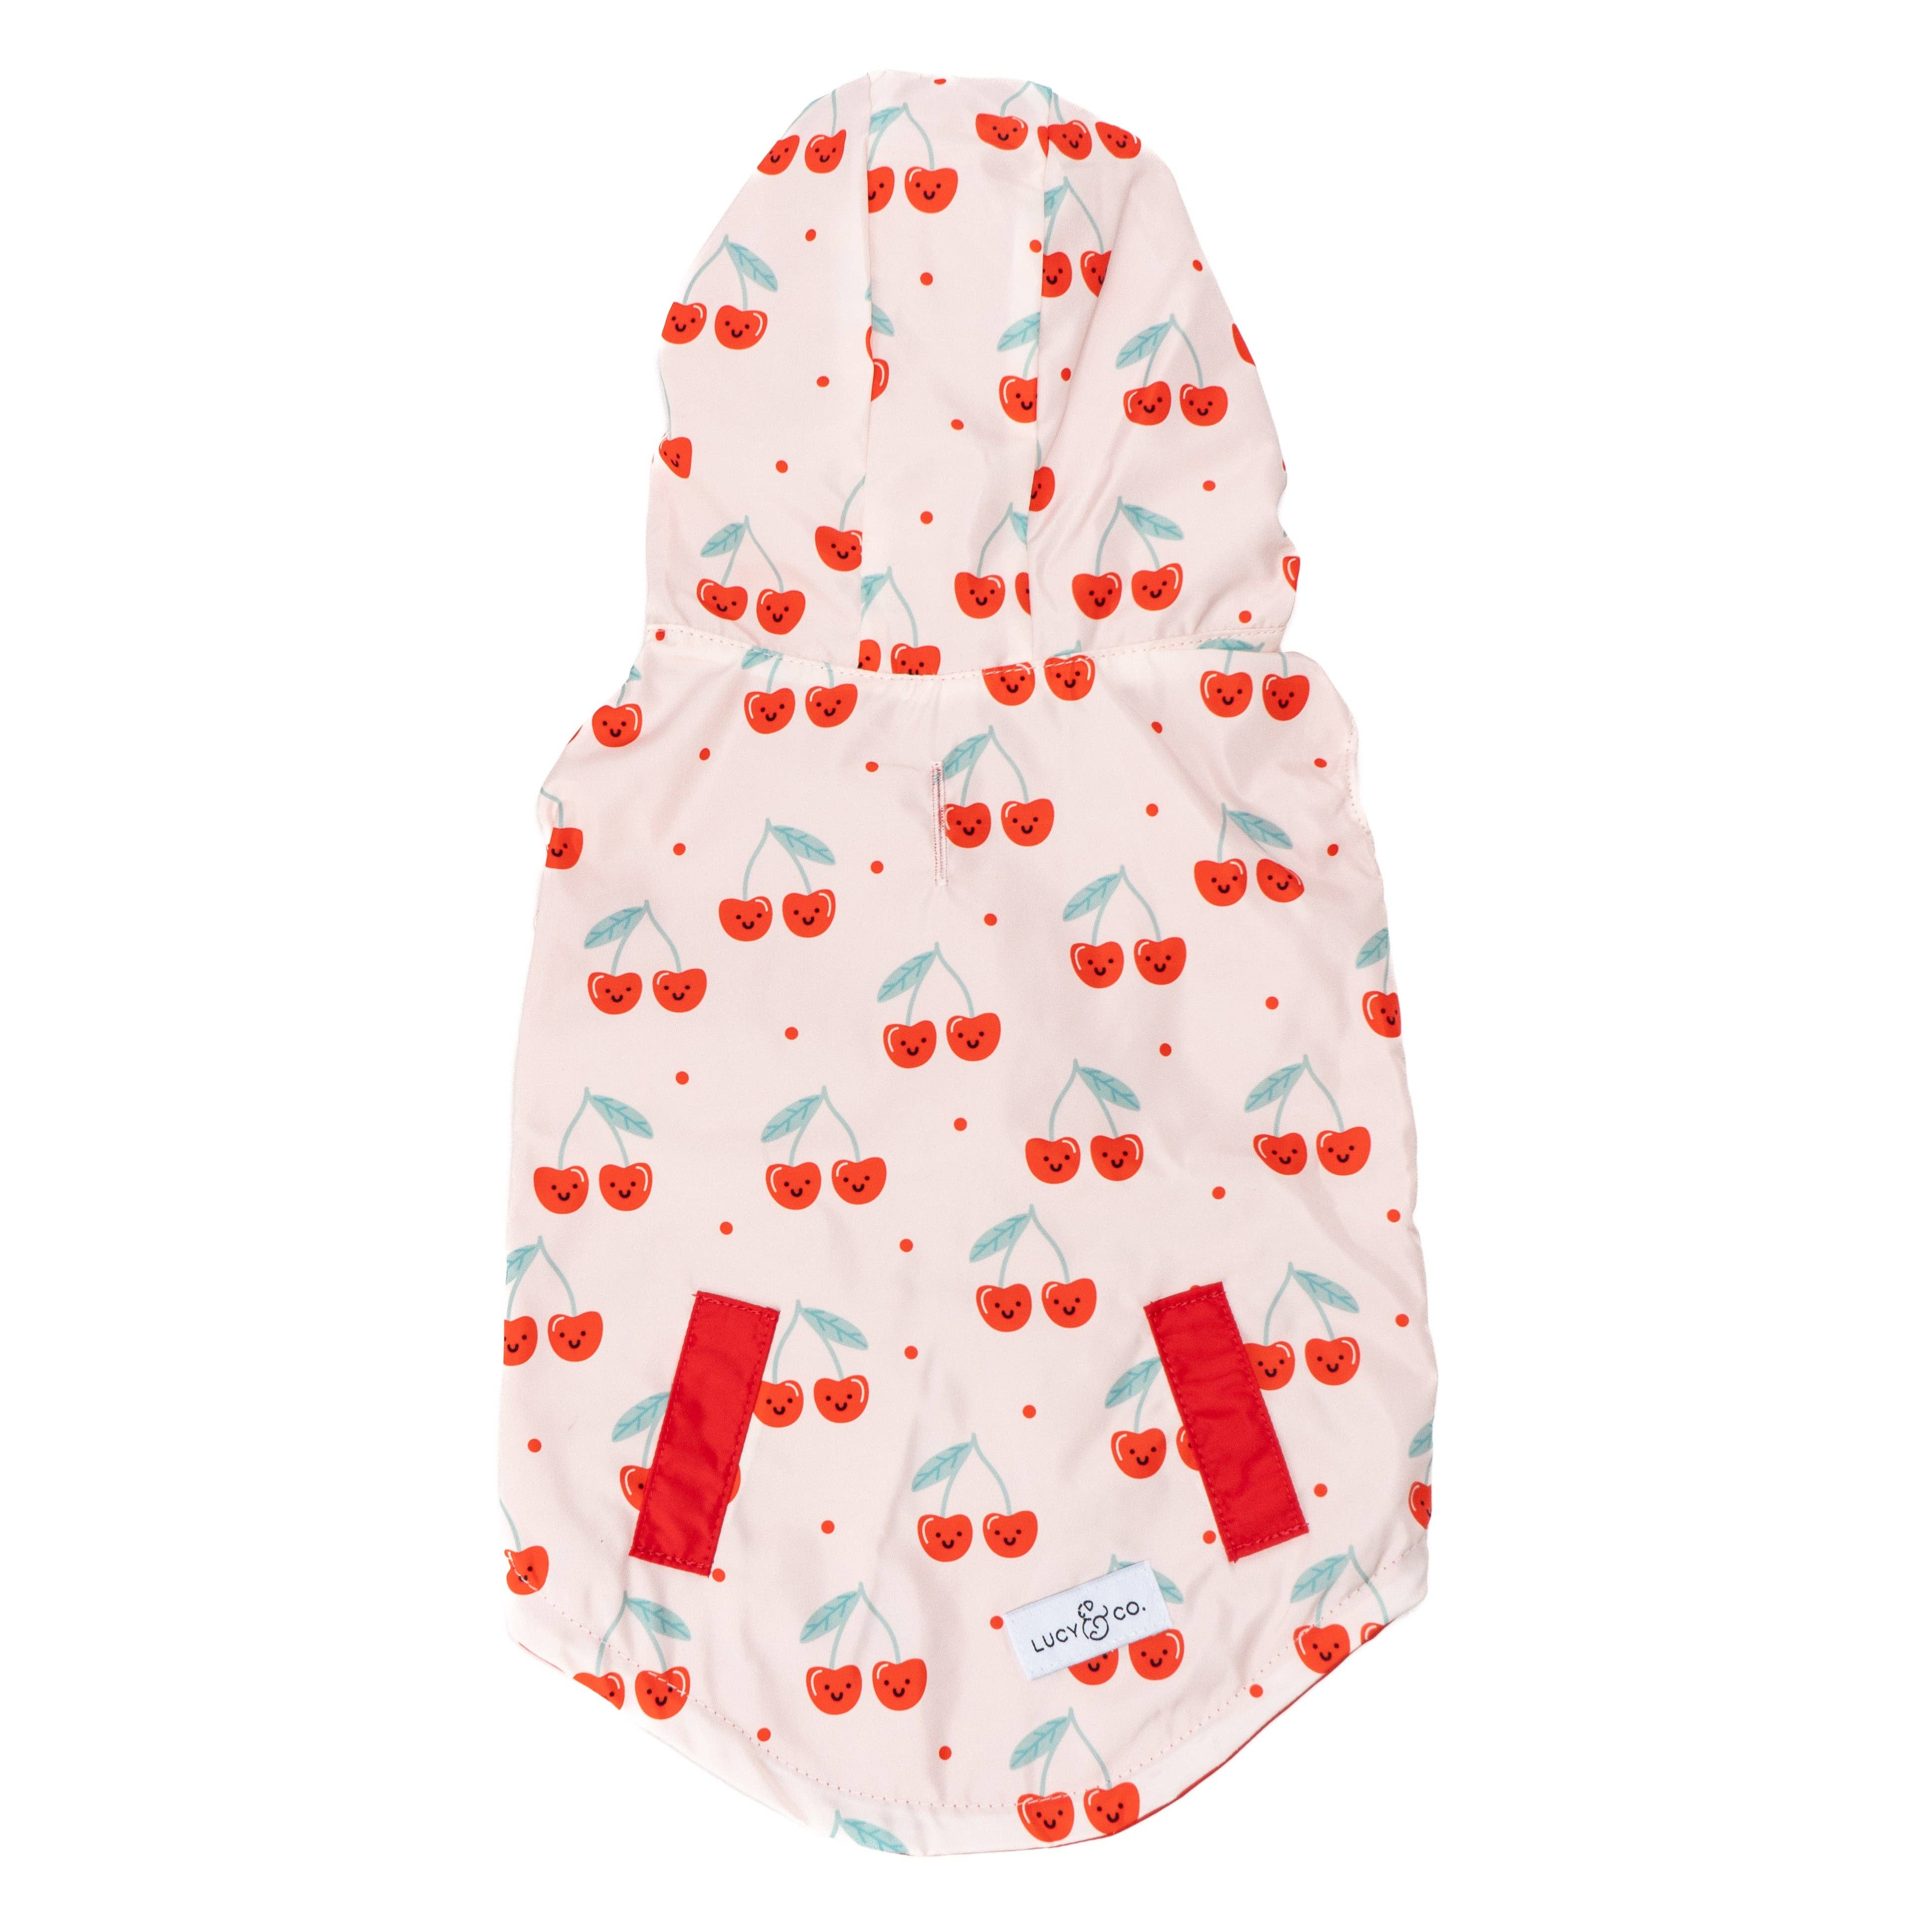 Lucy & Co. - The Cheery Cherries Reversible Raincoat: Large